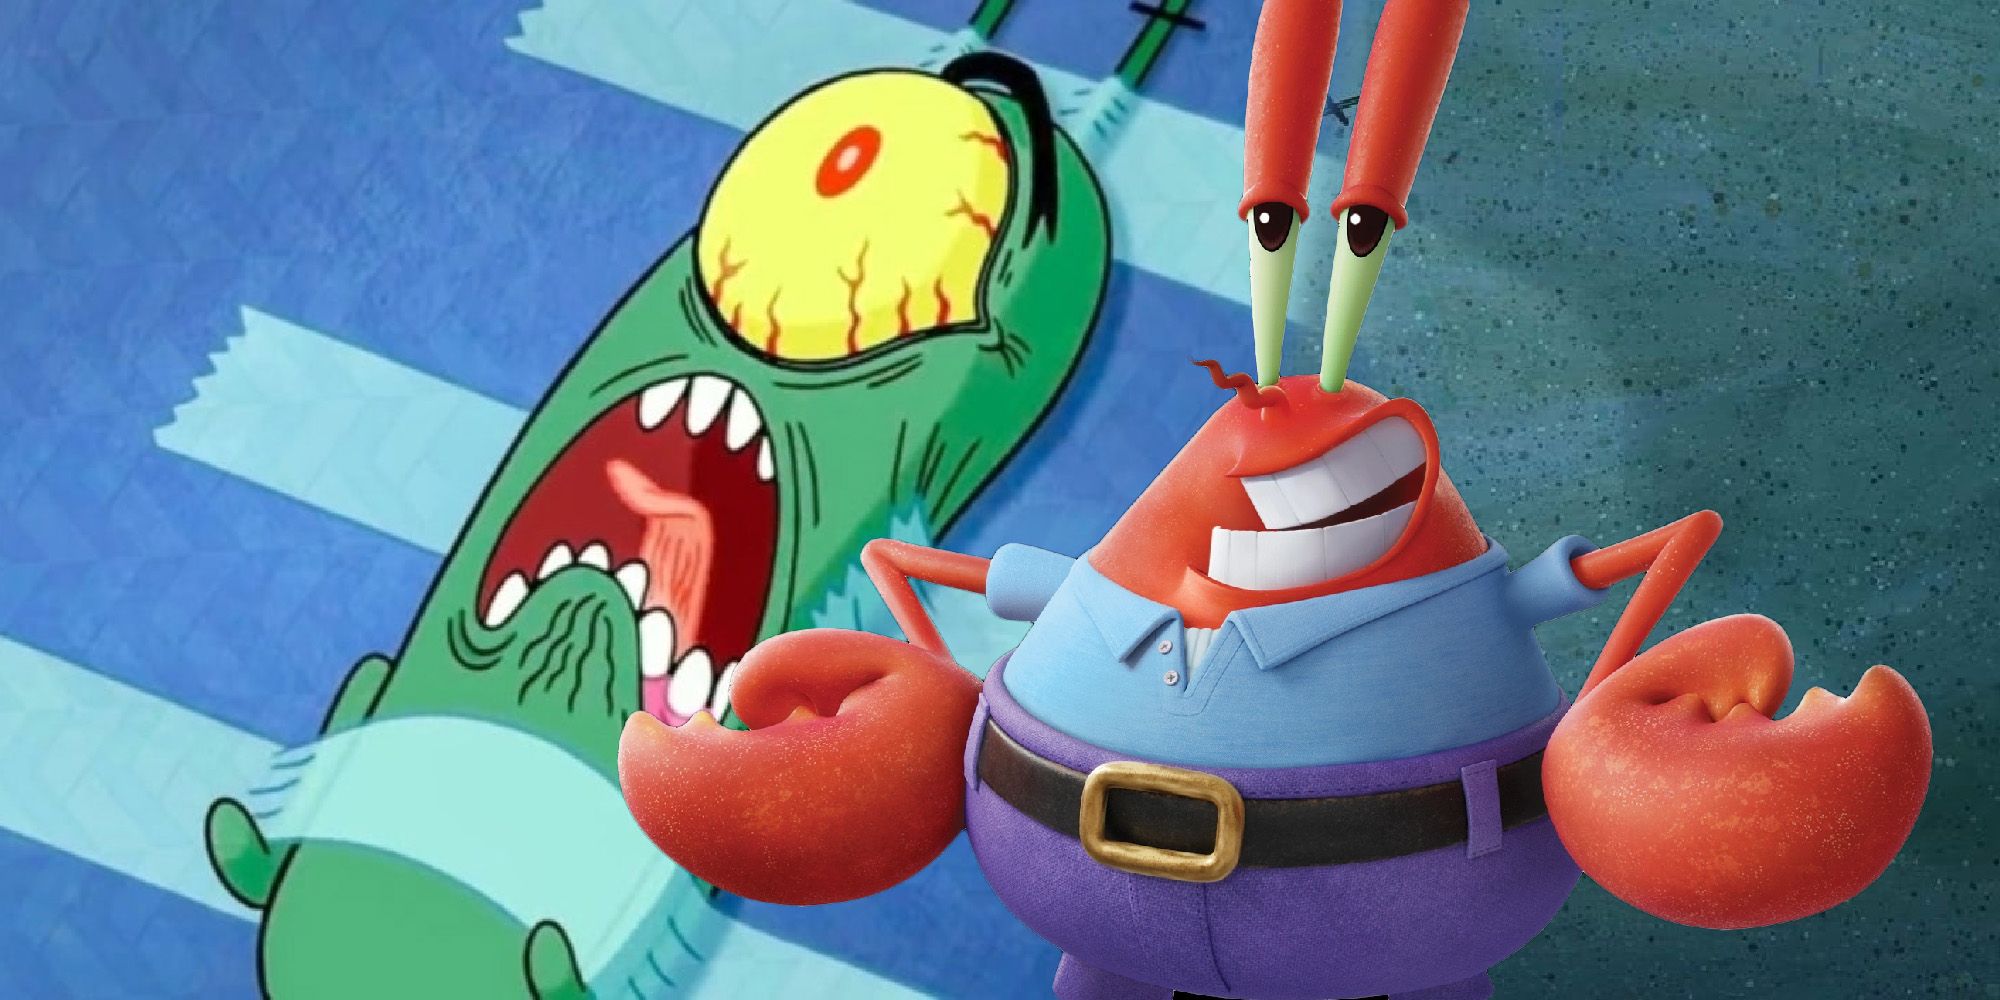 the one between Mr. Krabs and Plankton, but why do they hate each other so ...